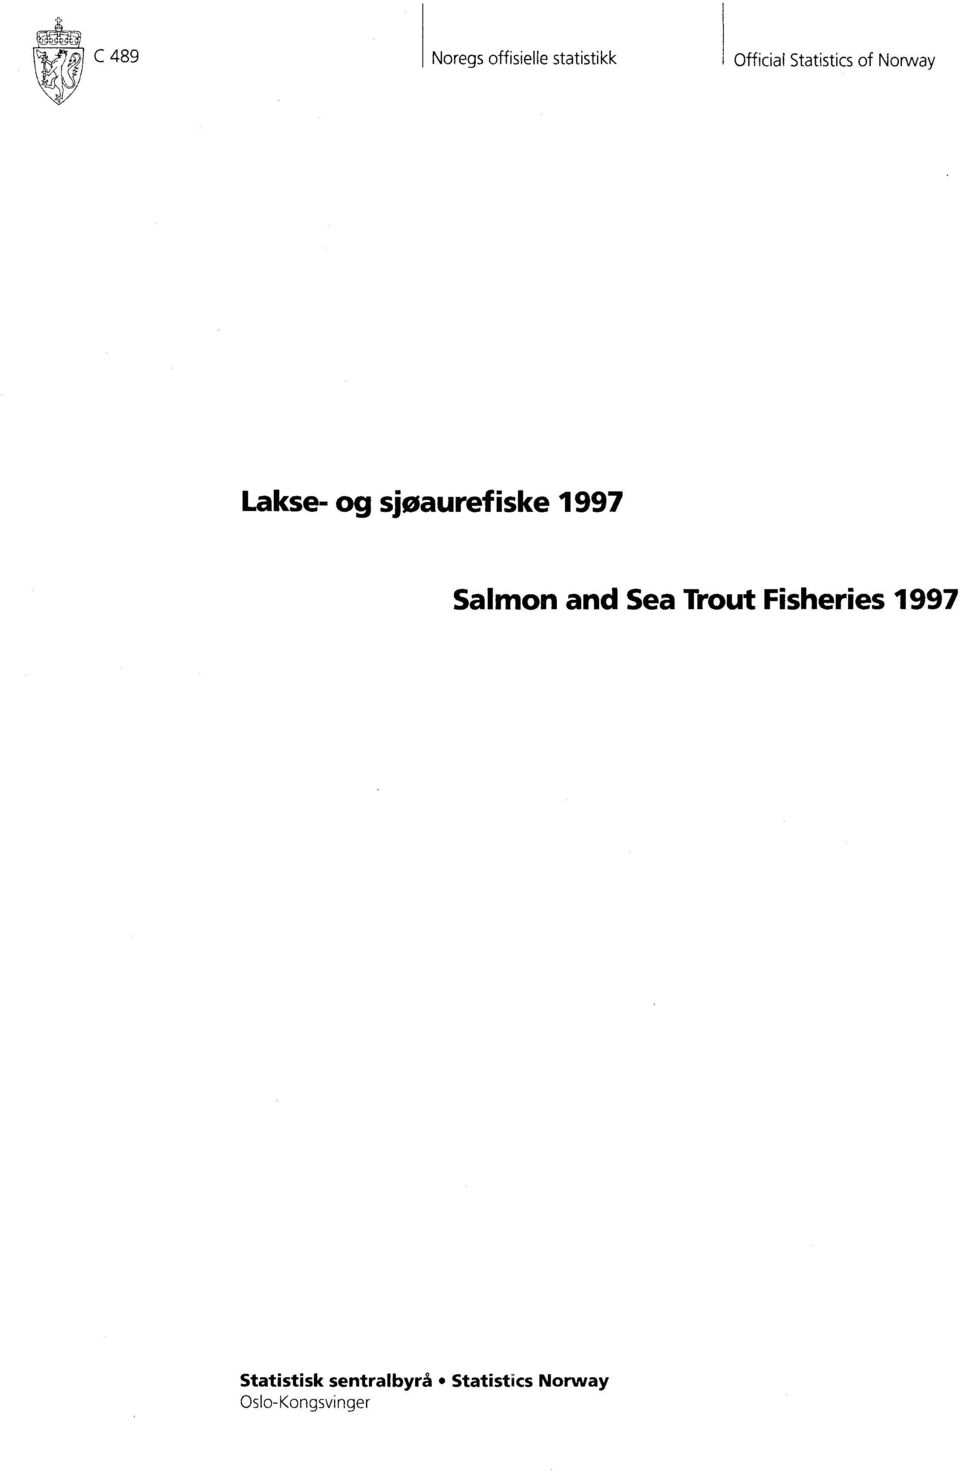 1997 Salmon and Sea Trout Fisheries 1997